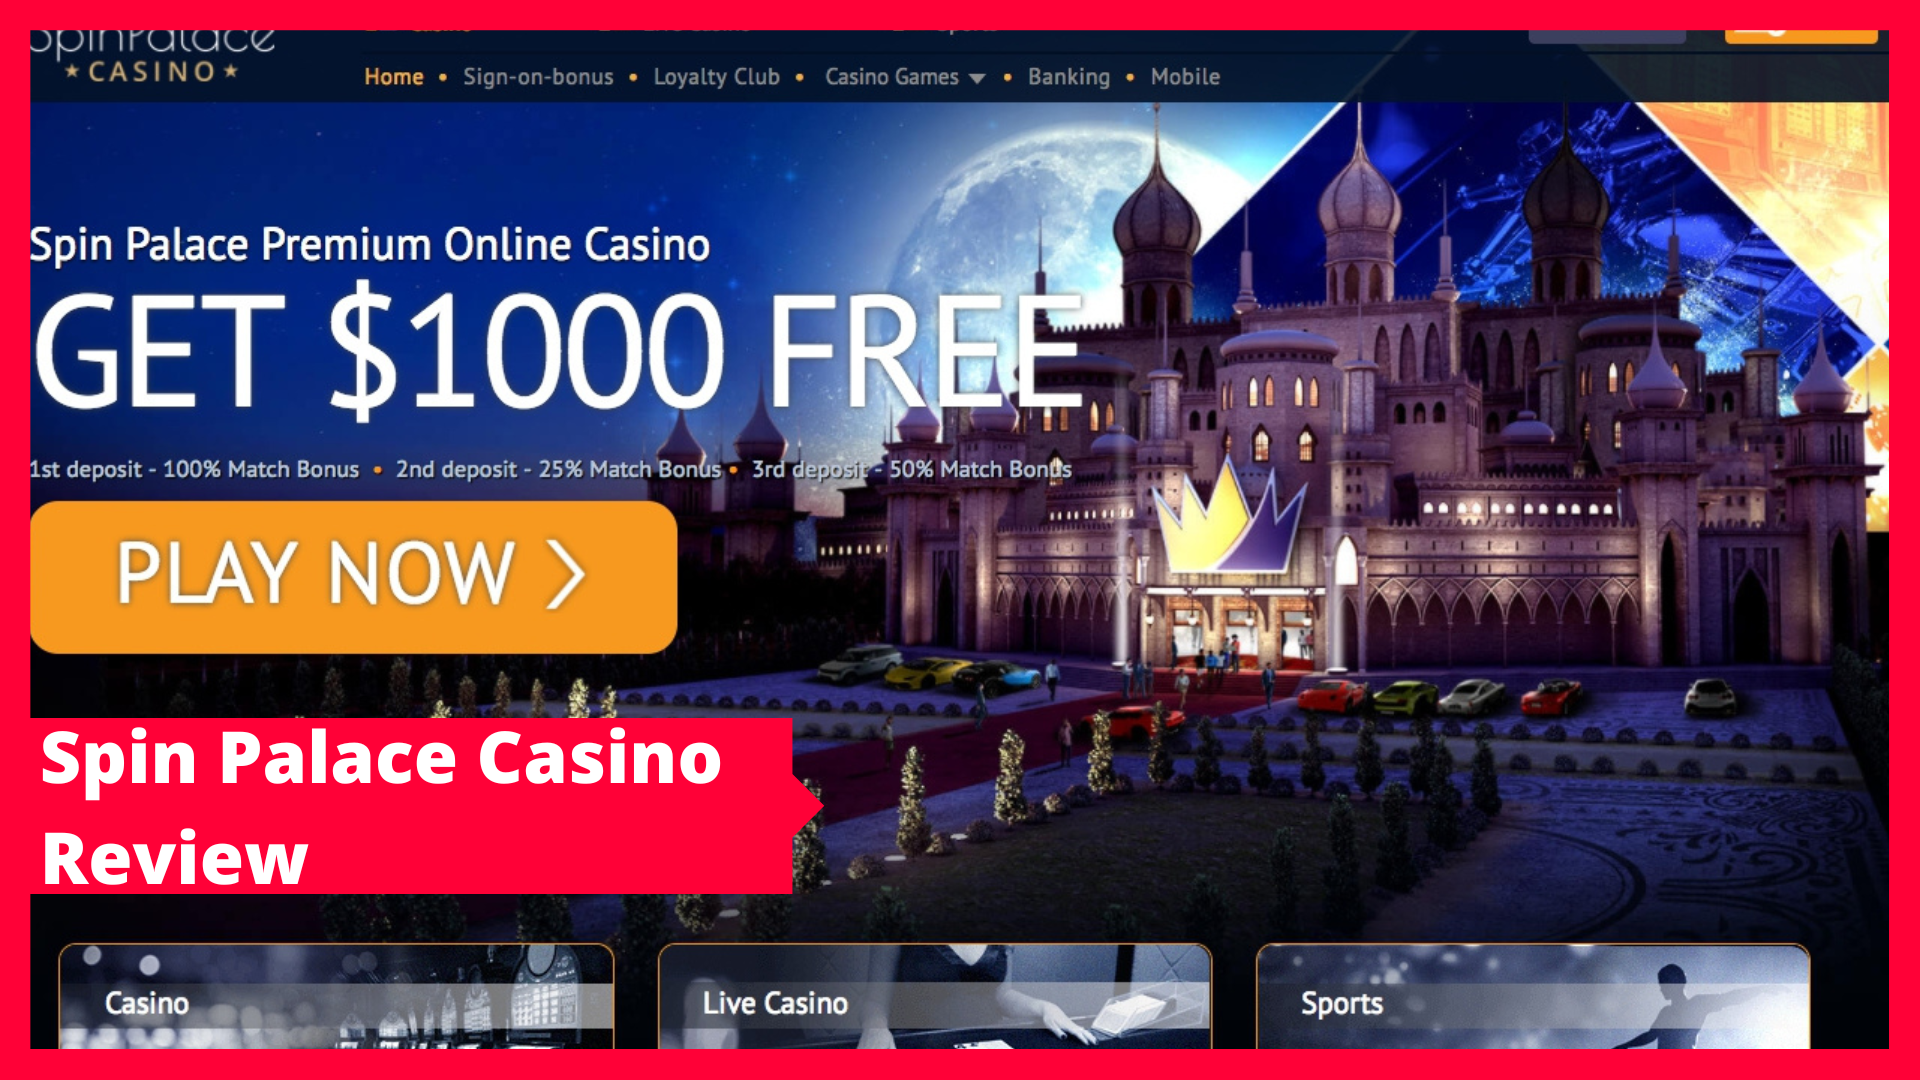 SpinPalace casino review